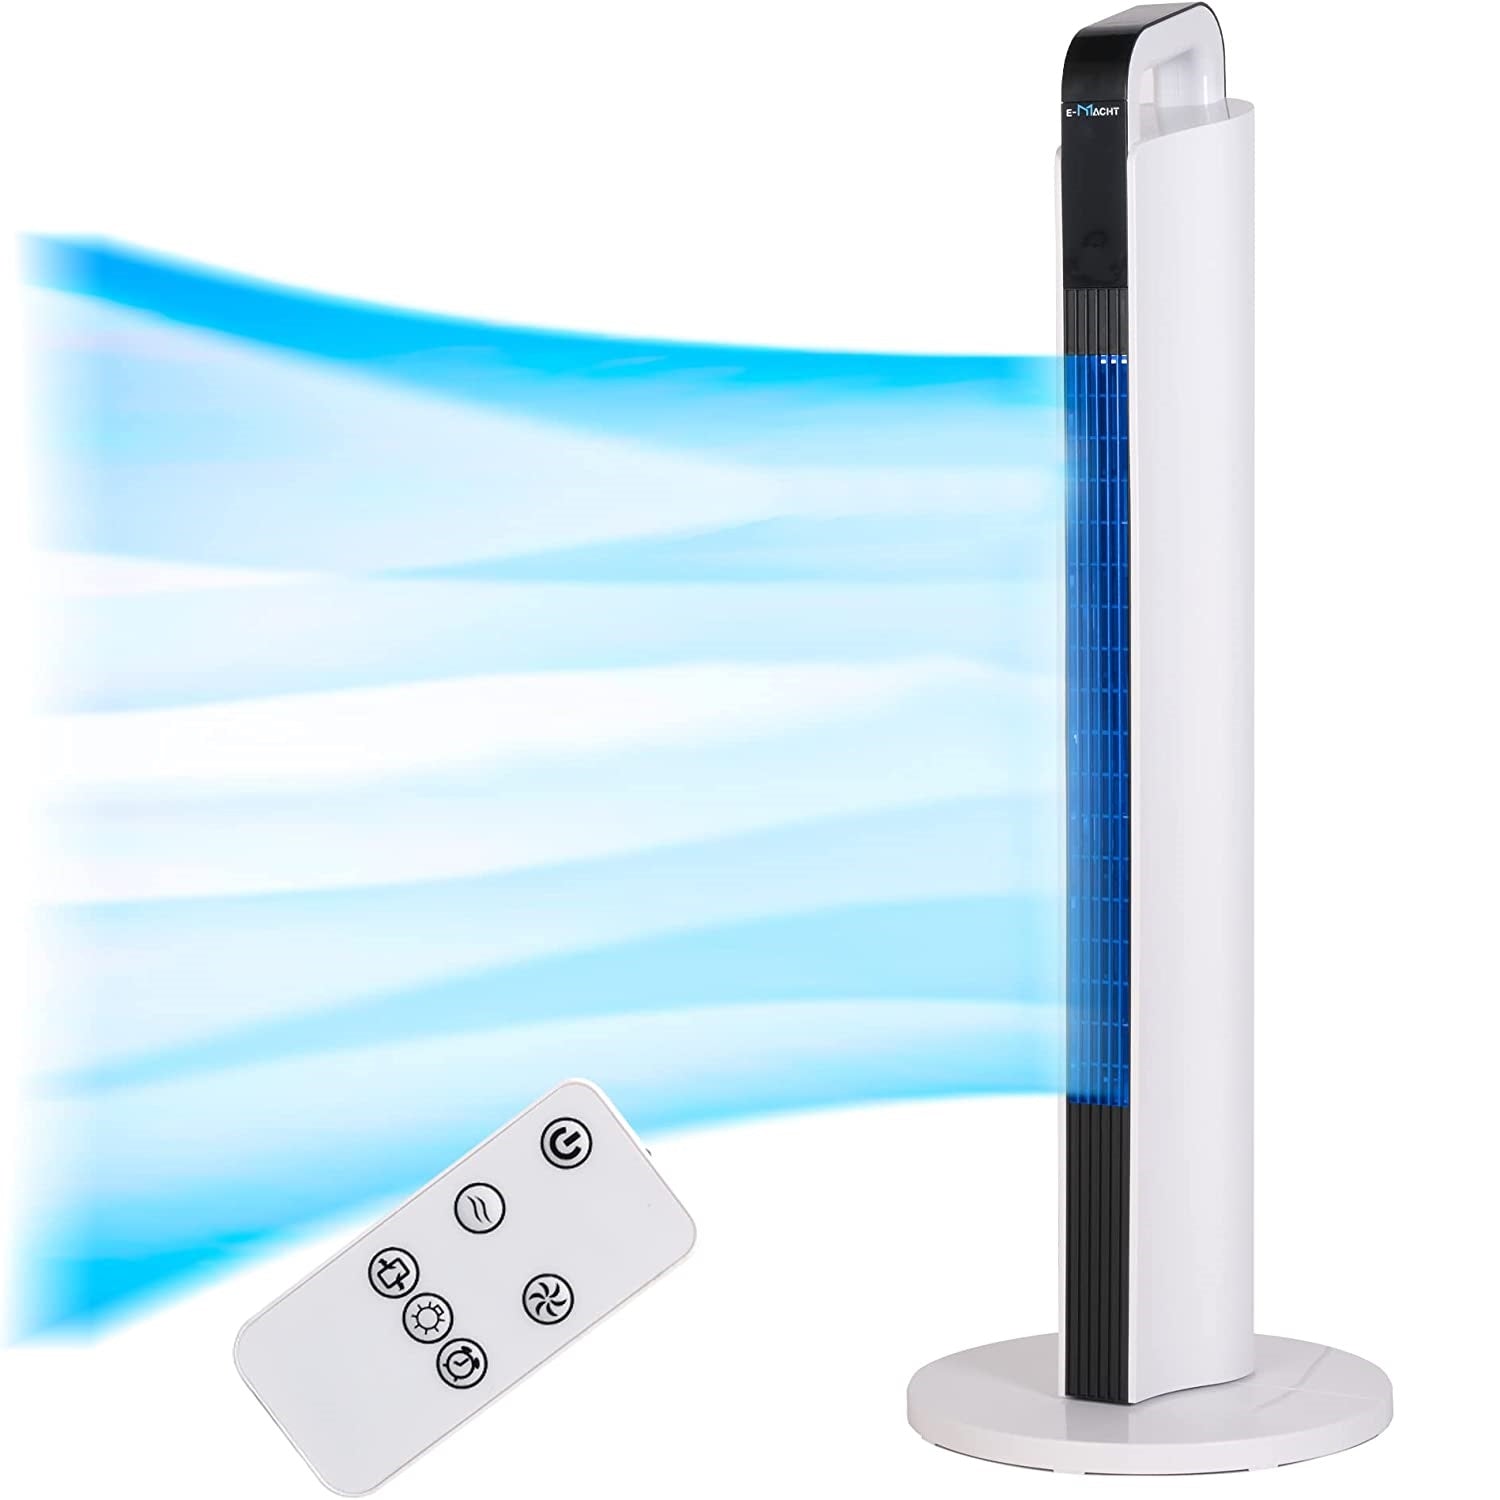 Tower Fan with Remote, E-Macht 35 Inches Oscillating Fan Bladeless Floor Fans w/ LED Display